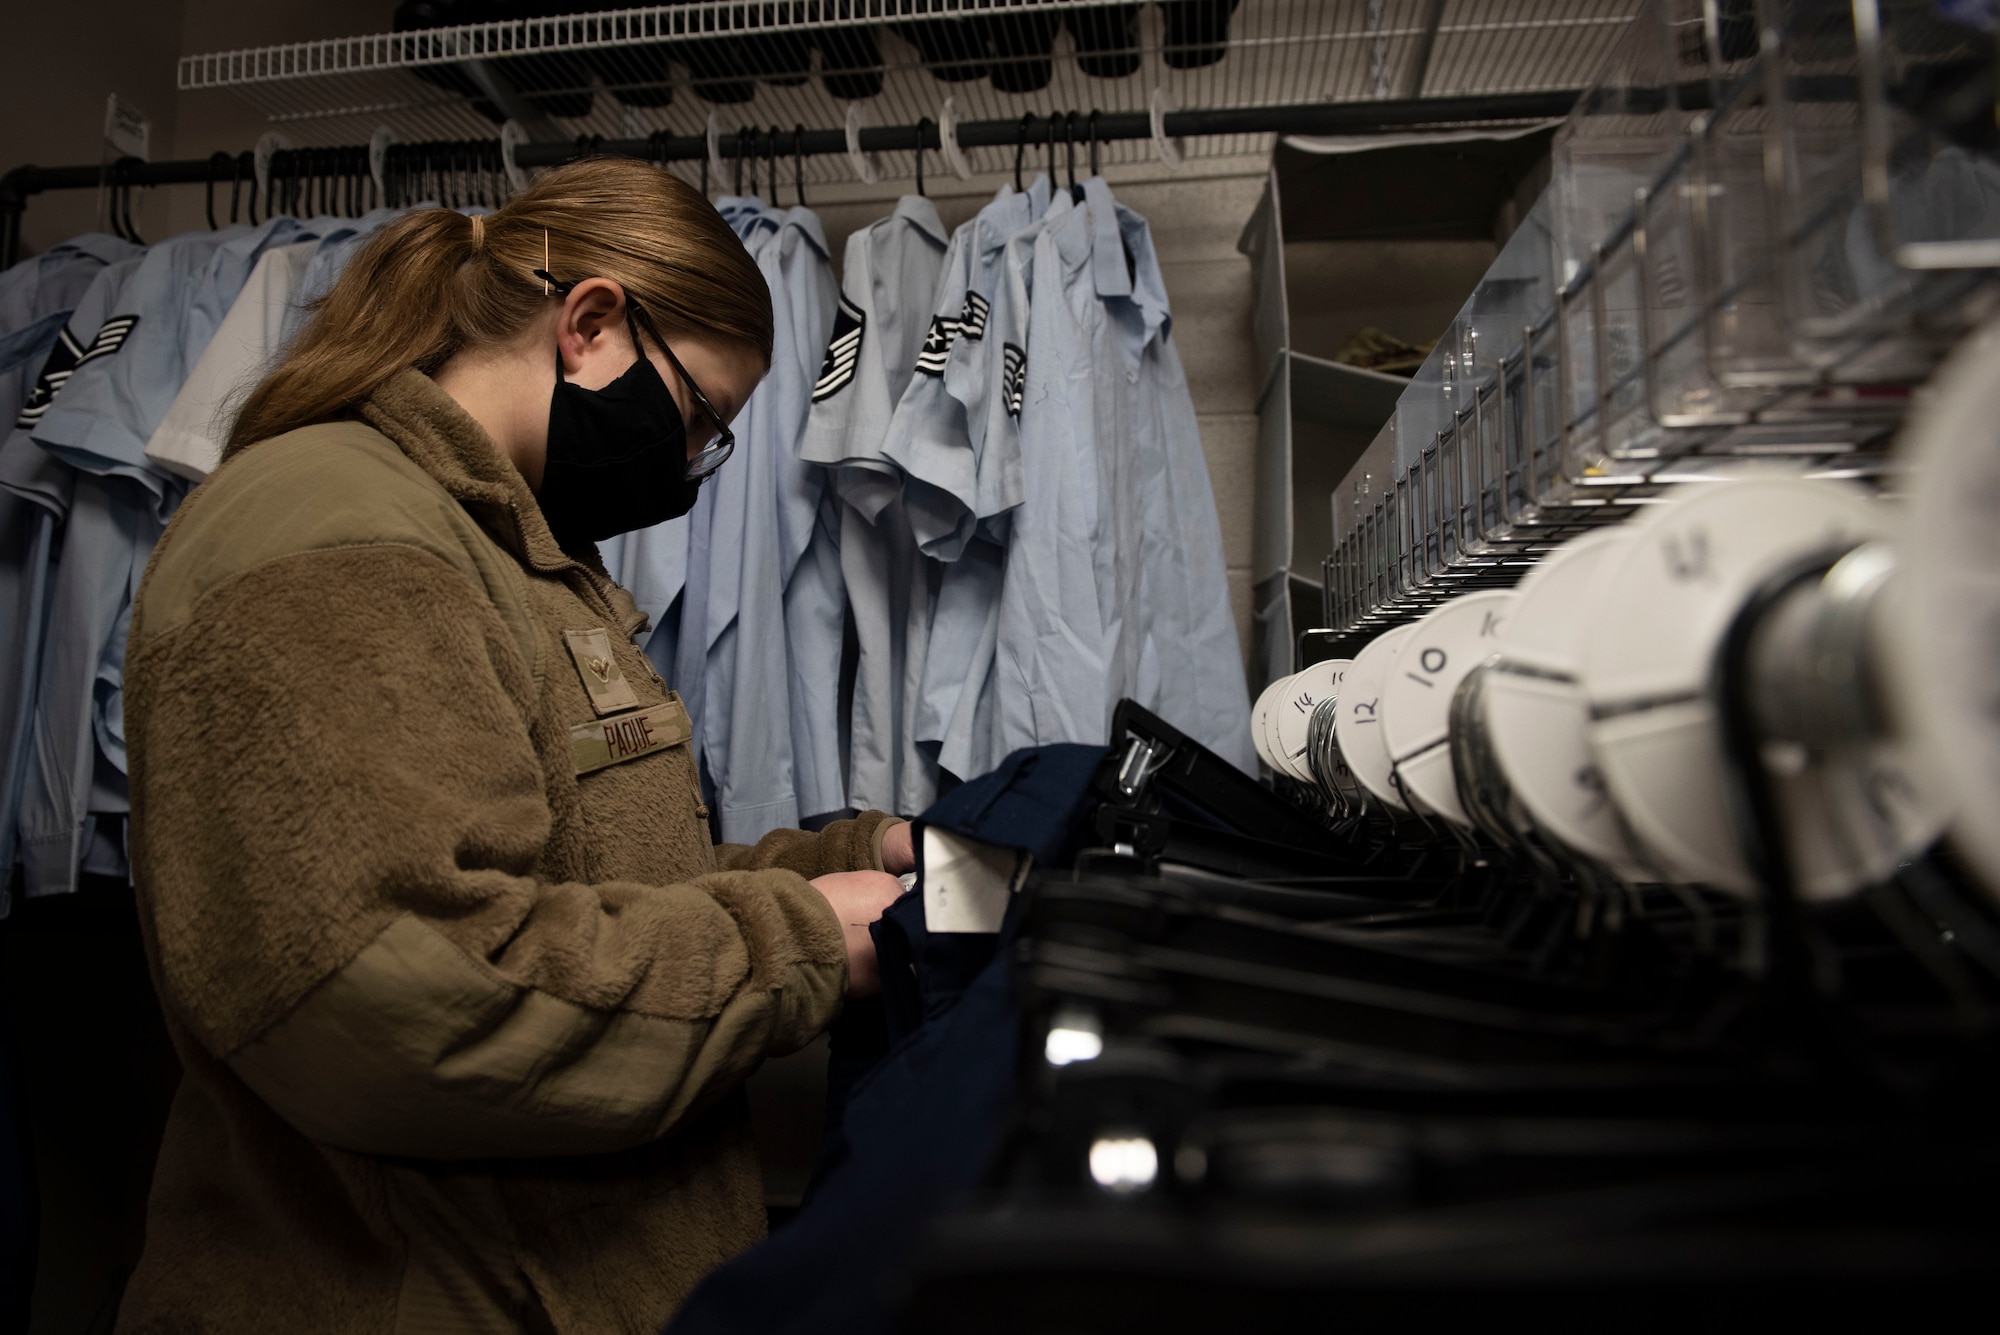 Airman Abigail Paque, 4th Fighter Wing paralegal, shops for service dress uniforms at the Airman’s Attic at Seymour Johnson Air Force Base, N.C., Jan. 6, 2022. Some of the supplies provided to the Airman’s Attic are recycled from other Airmen either due to permanent change of station, deployment or just downsizing. (U.S Air Force photo by Airman 1st Class Sabrina Fuller)